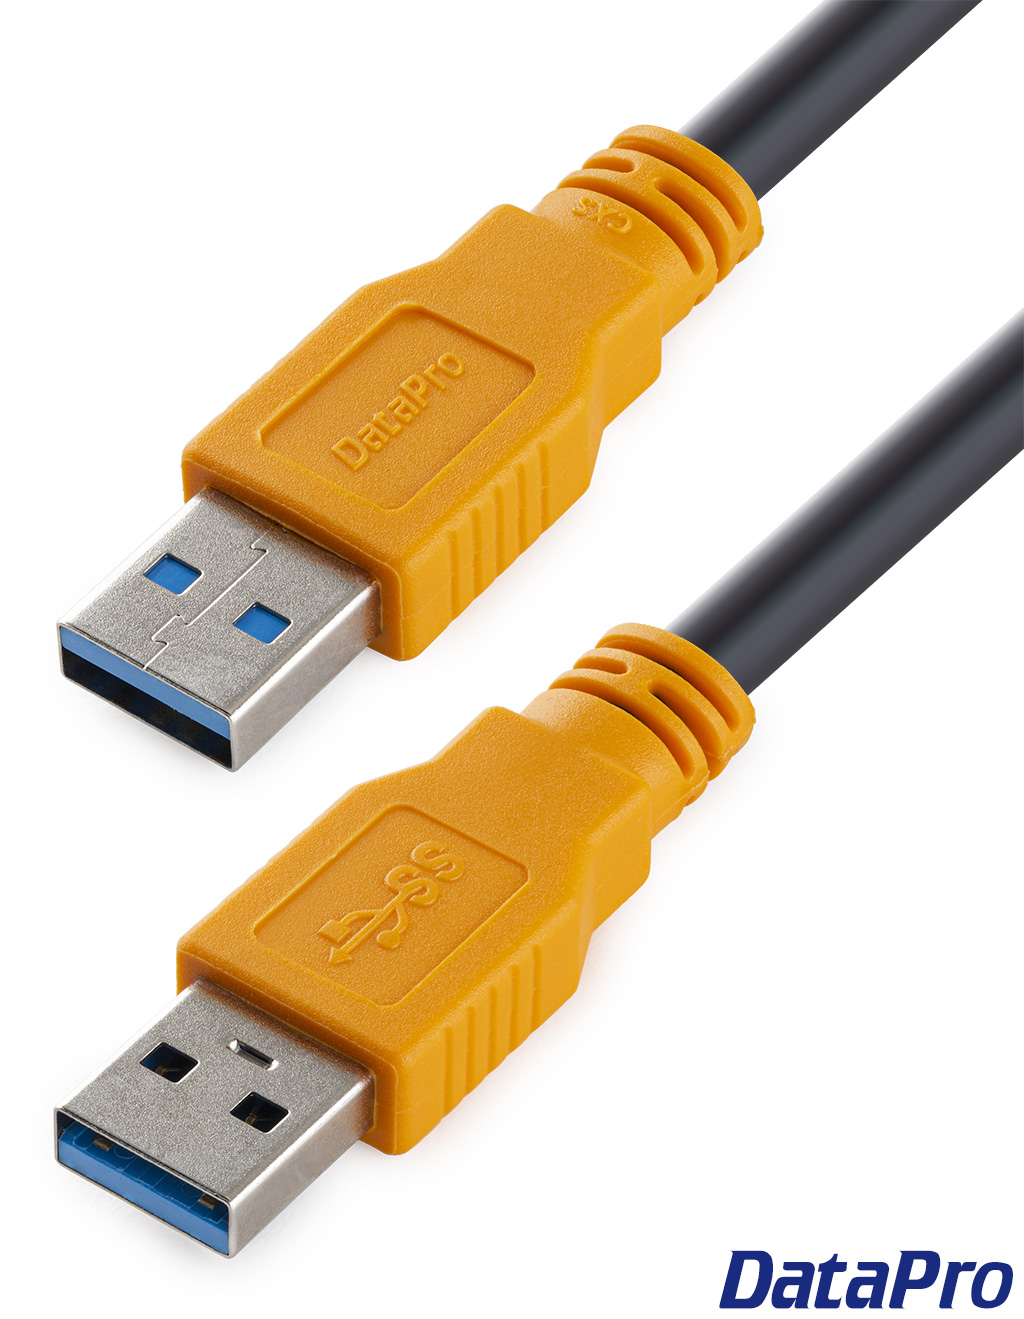 USB3 Cables, SuperSpeed USB Cables